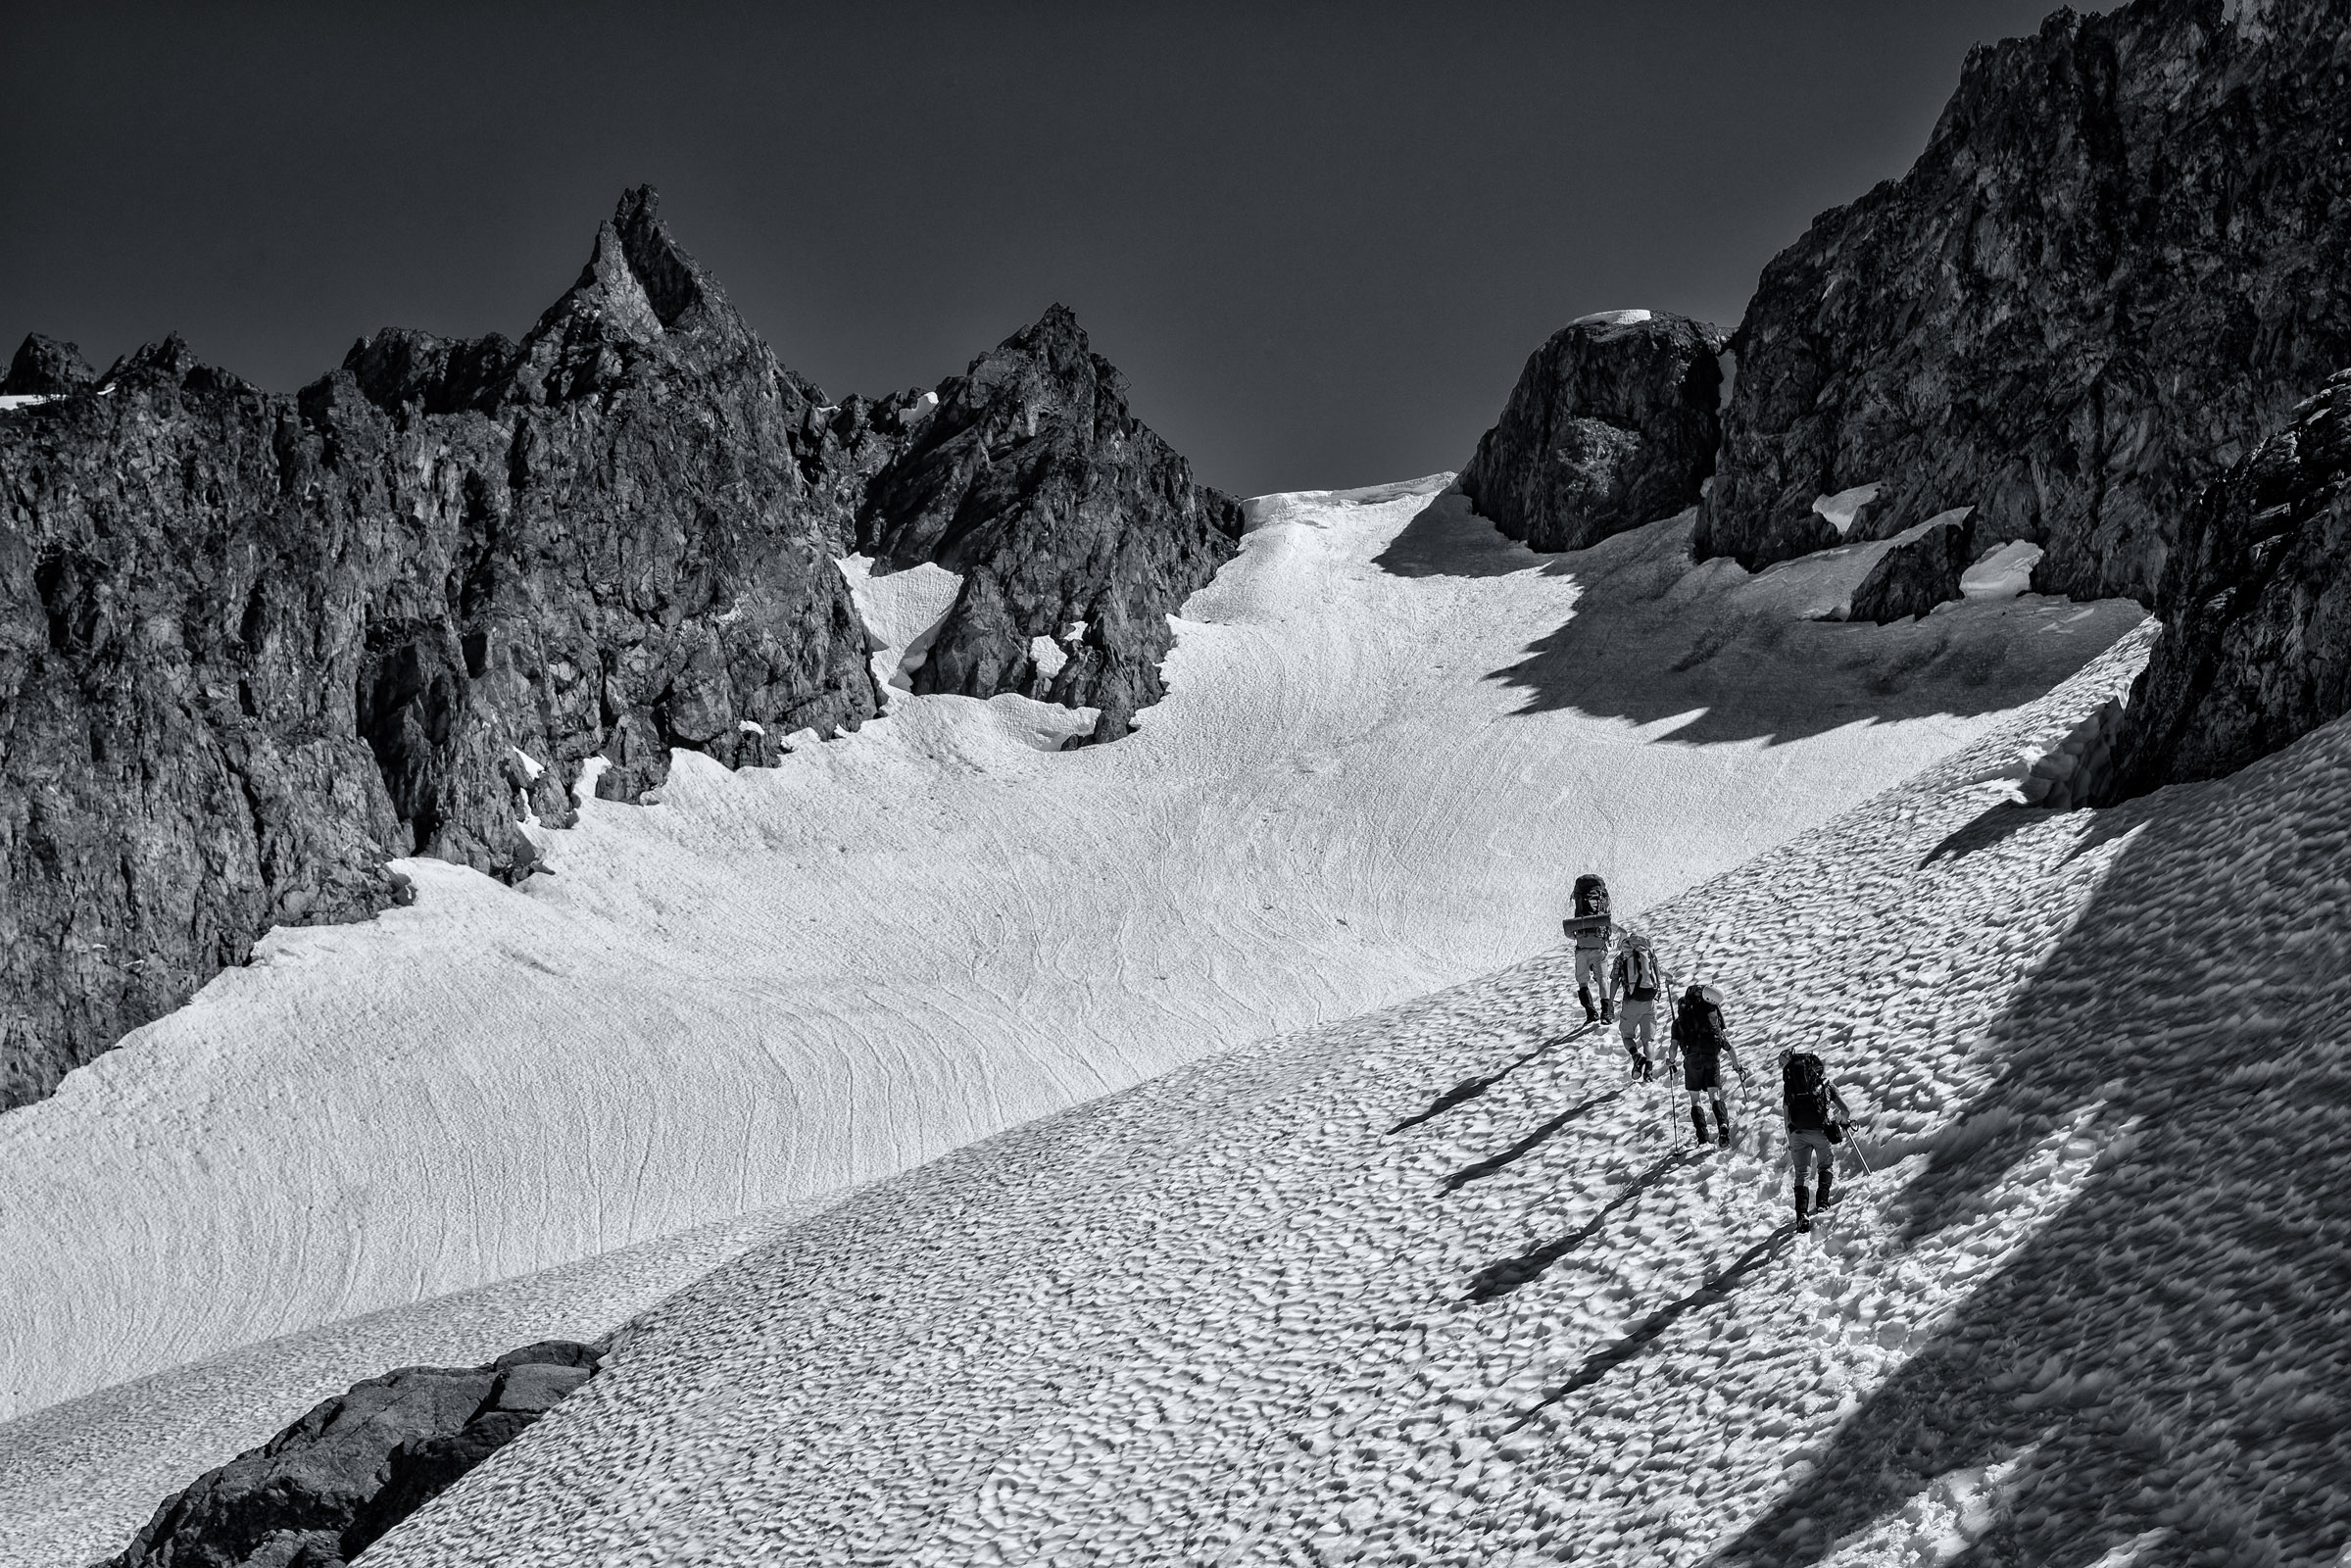  Adventures: Mountaineering and scenery of the Ptarmigan Traverse, a 35 mile alpine traverse in the North Cascades of Washington State 